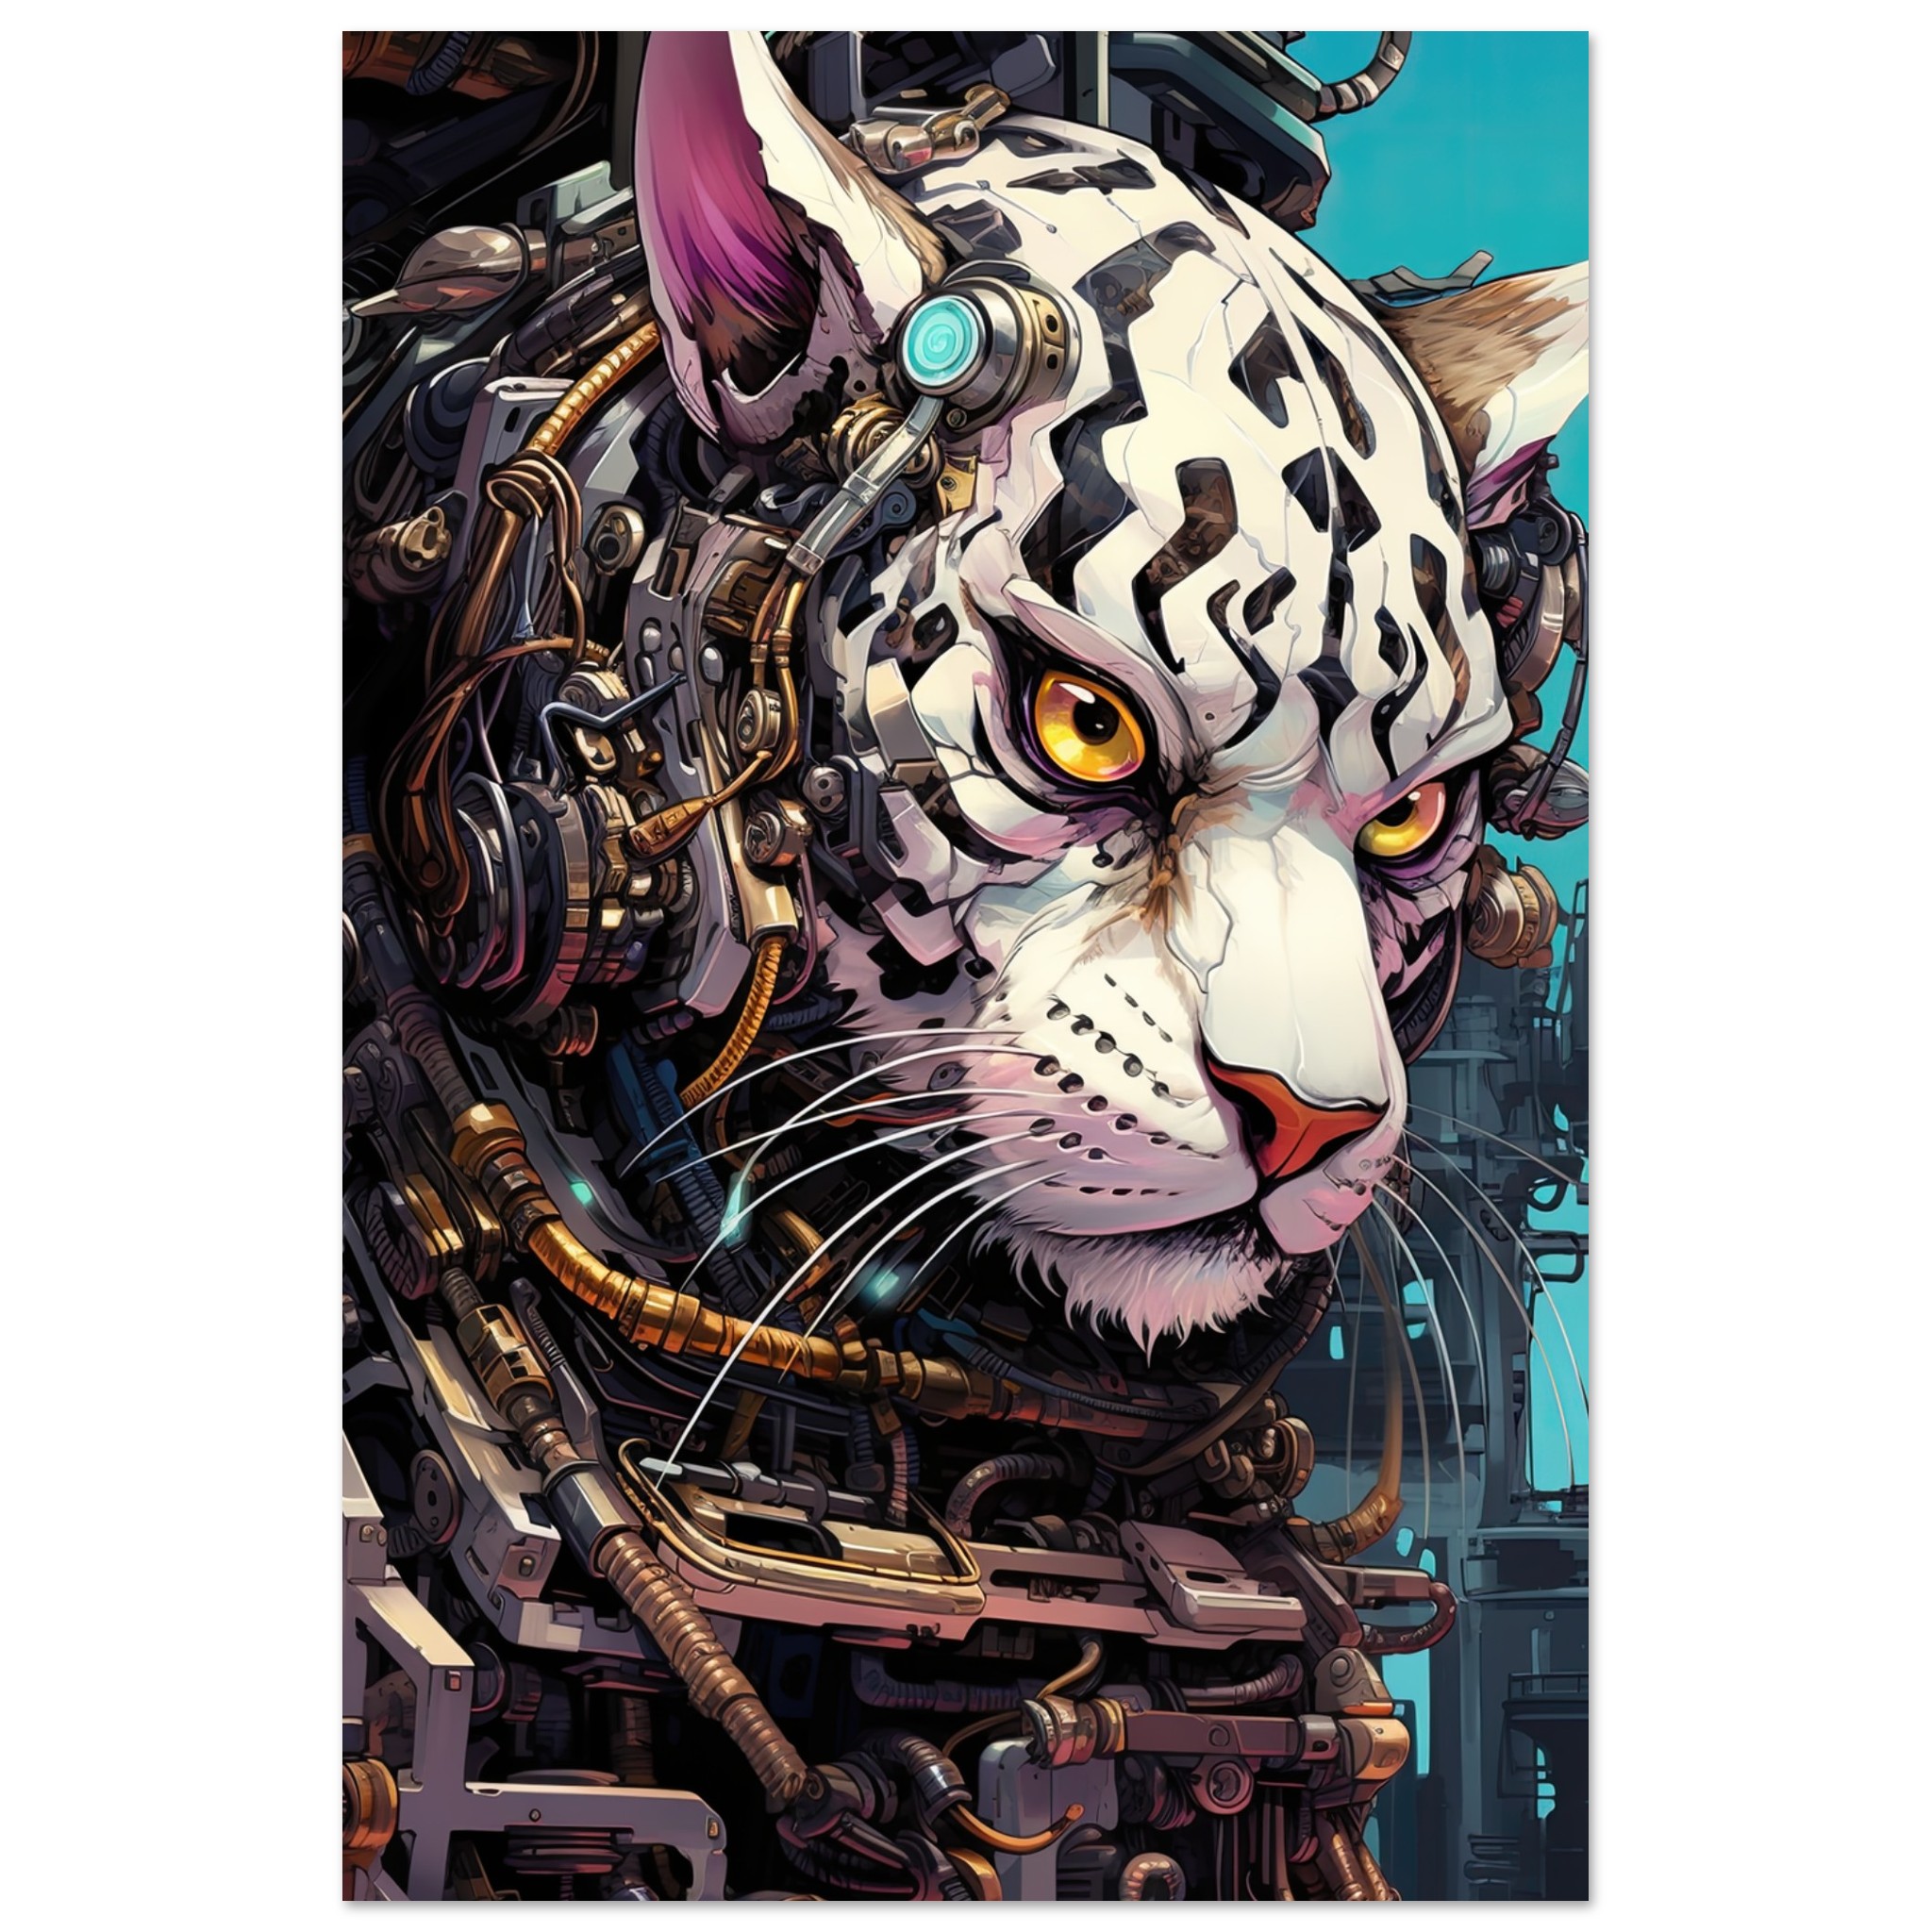 Cybernetic White Tiger Poster – 40×60 cm / 16×24″